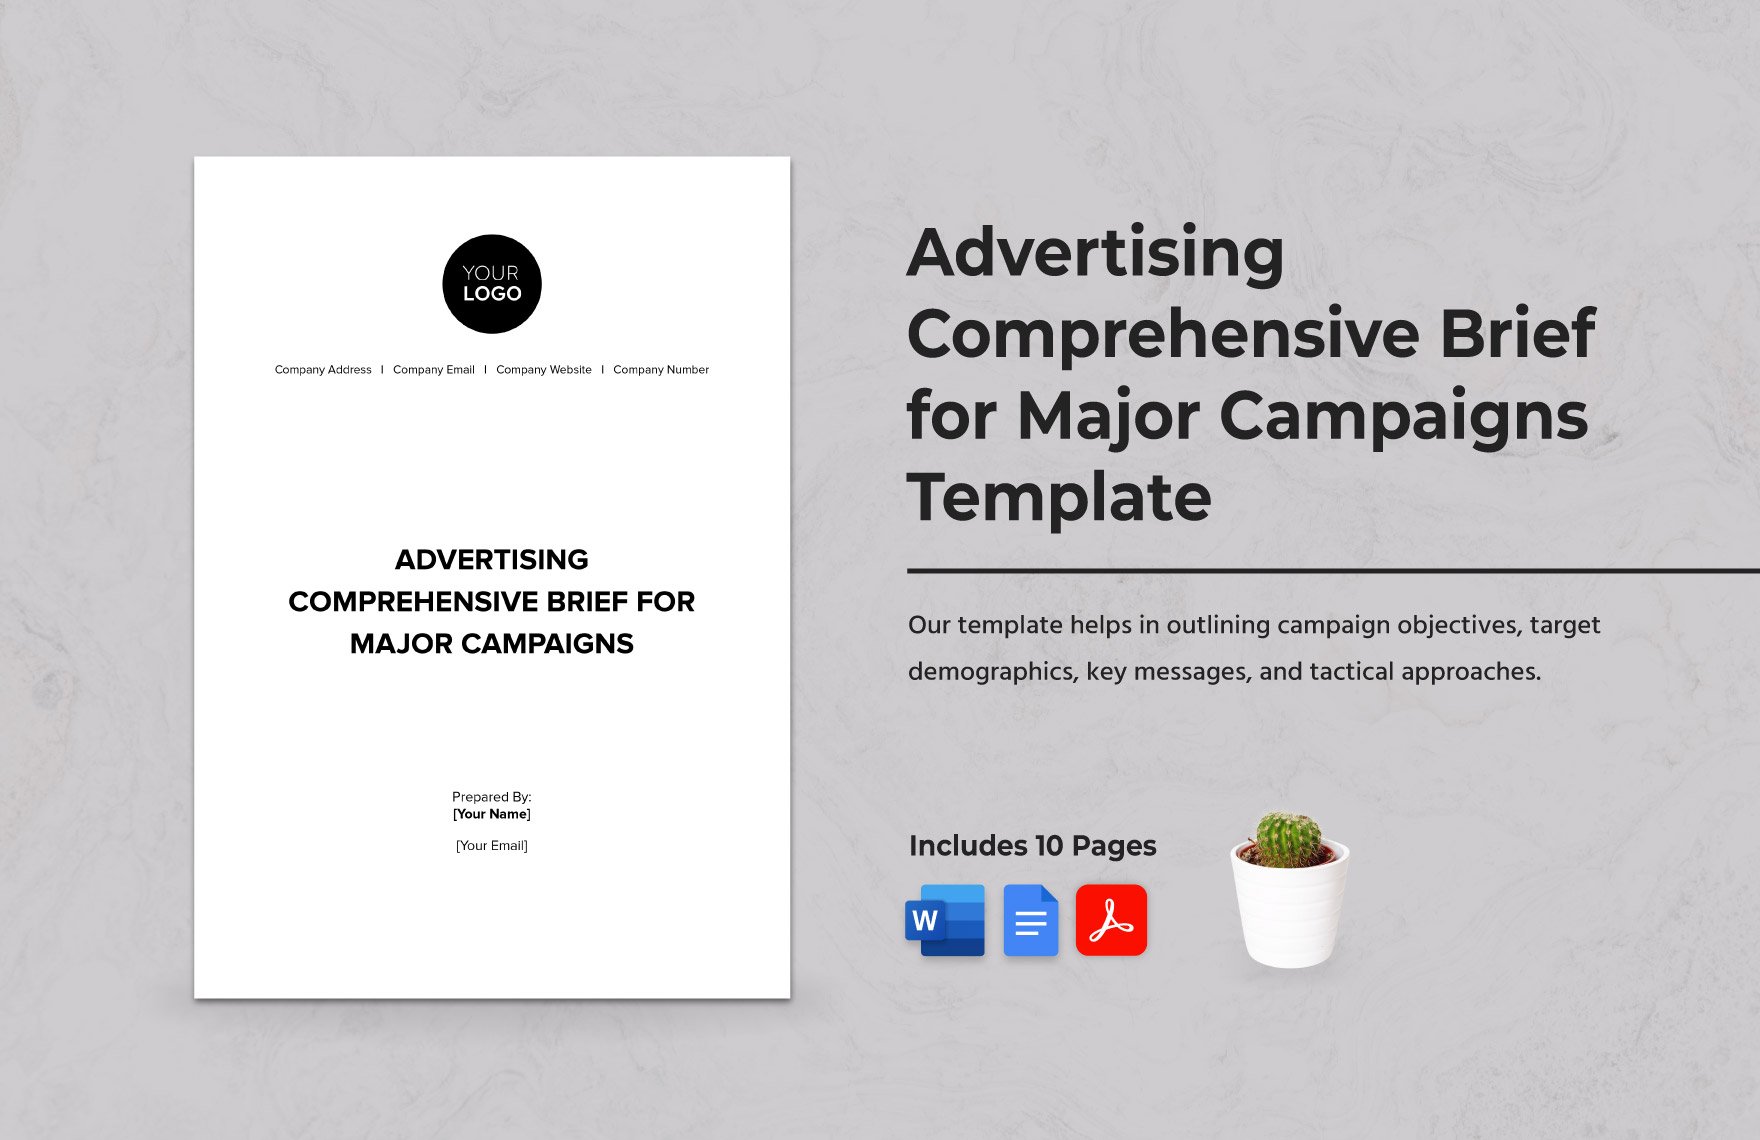 Advertising Comprehensive Brief for Major Campaigns Template